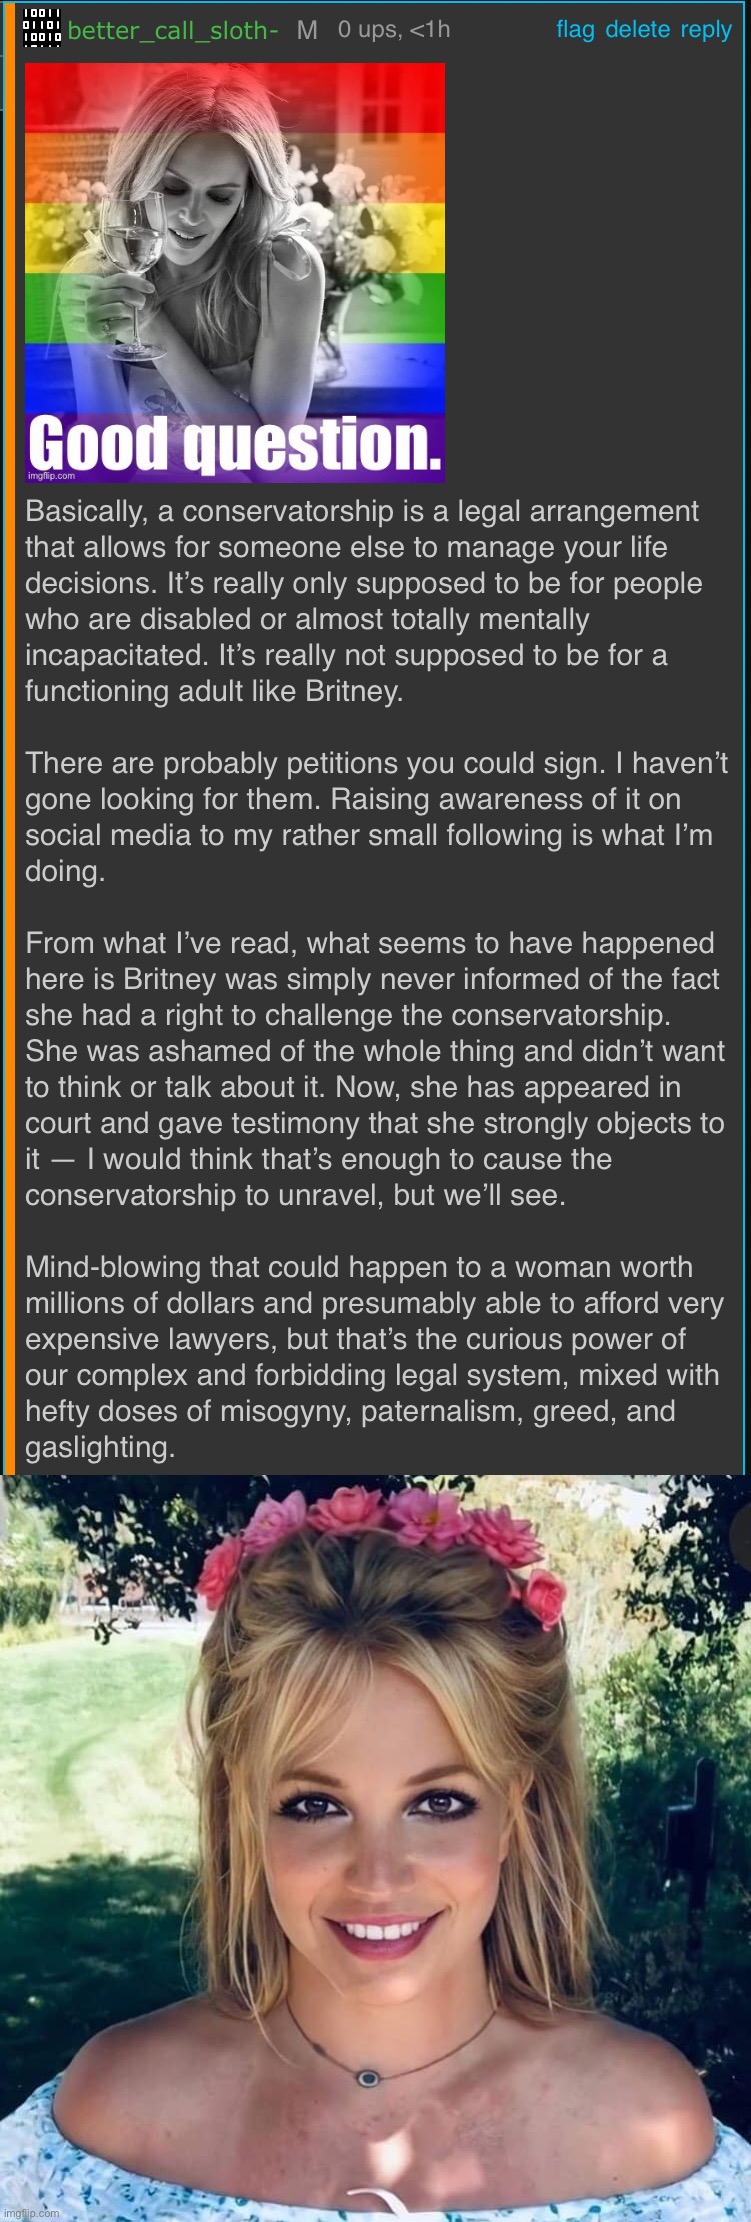 The Britney saga seems far-fetched and twisted. But it could happen to anyone. Learn to spot abusers. Know your rights. | image tagged in kyliefan roast free britney,britney spears,leave britney alone,free britney,freebritney,abuse | made w/ Imgflip meme maker